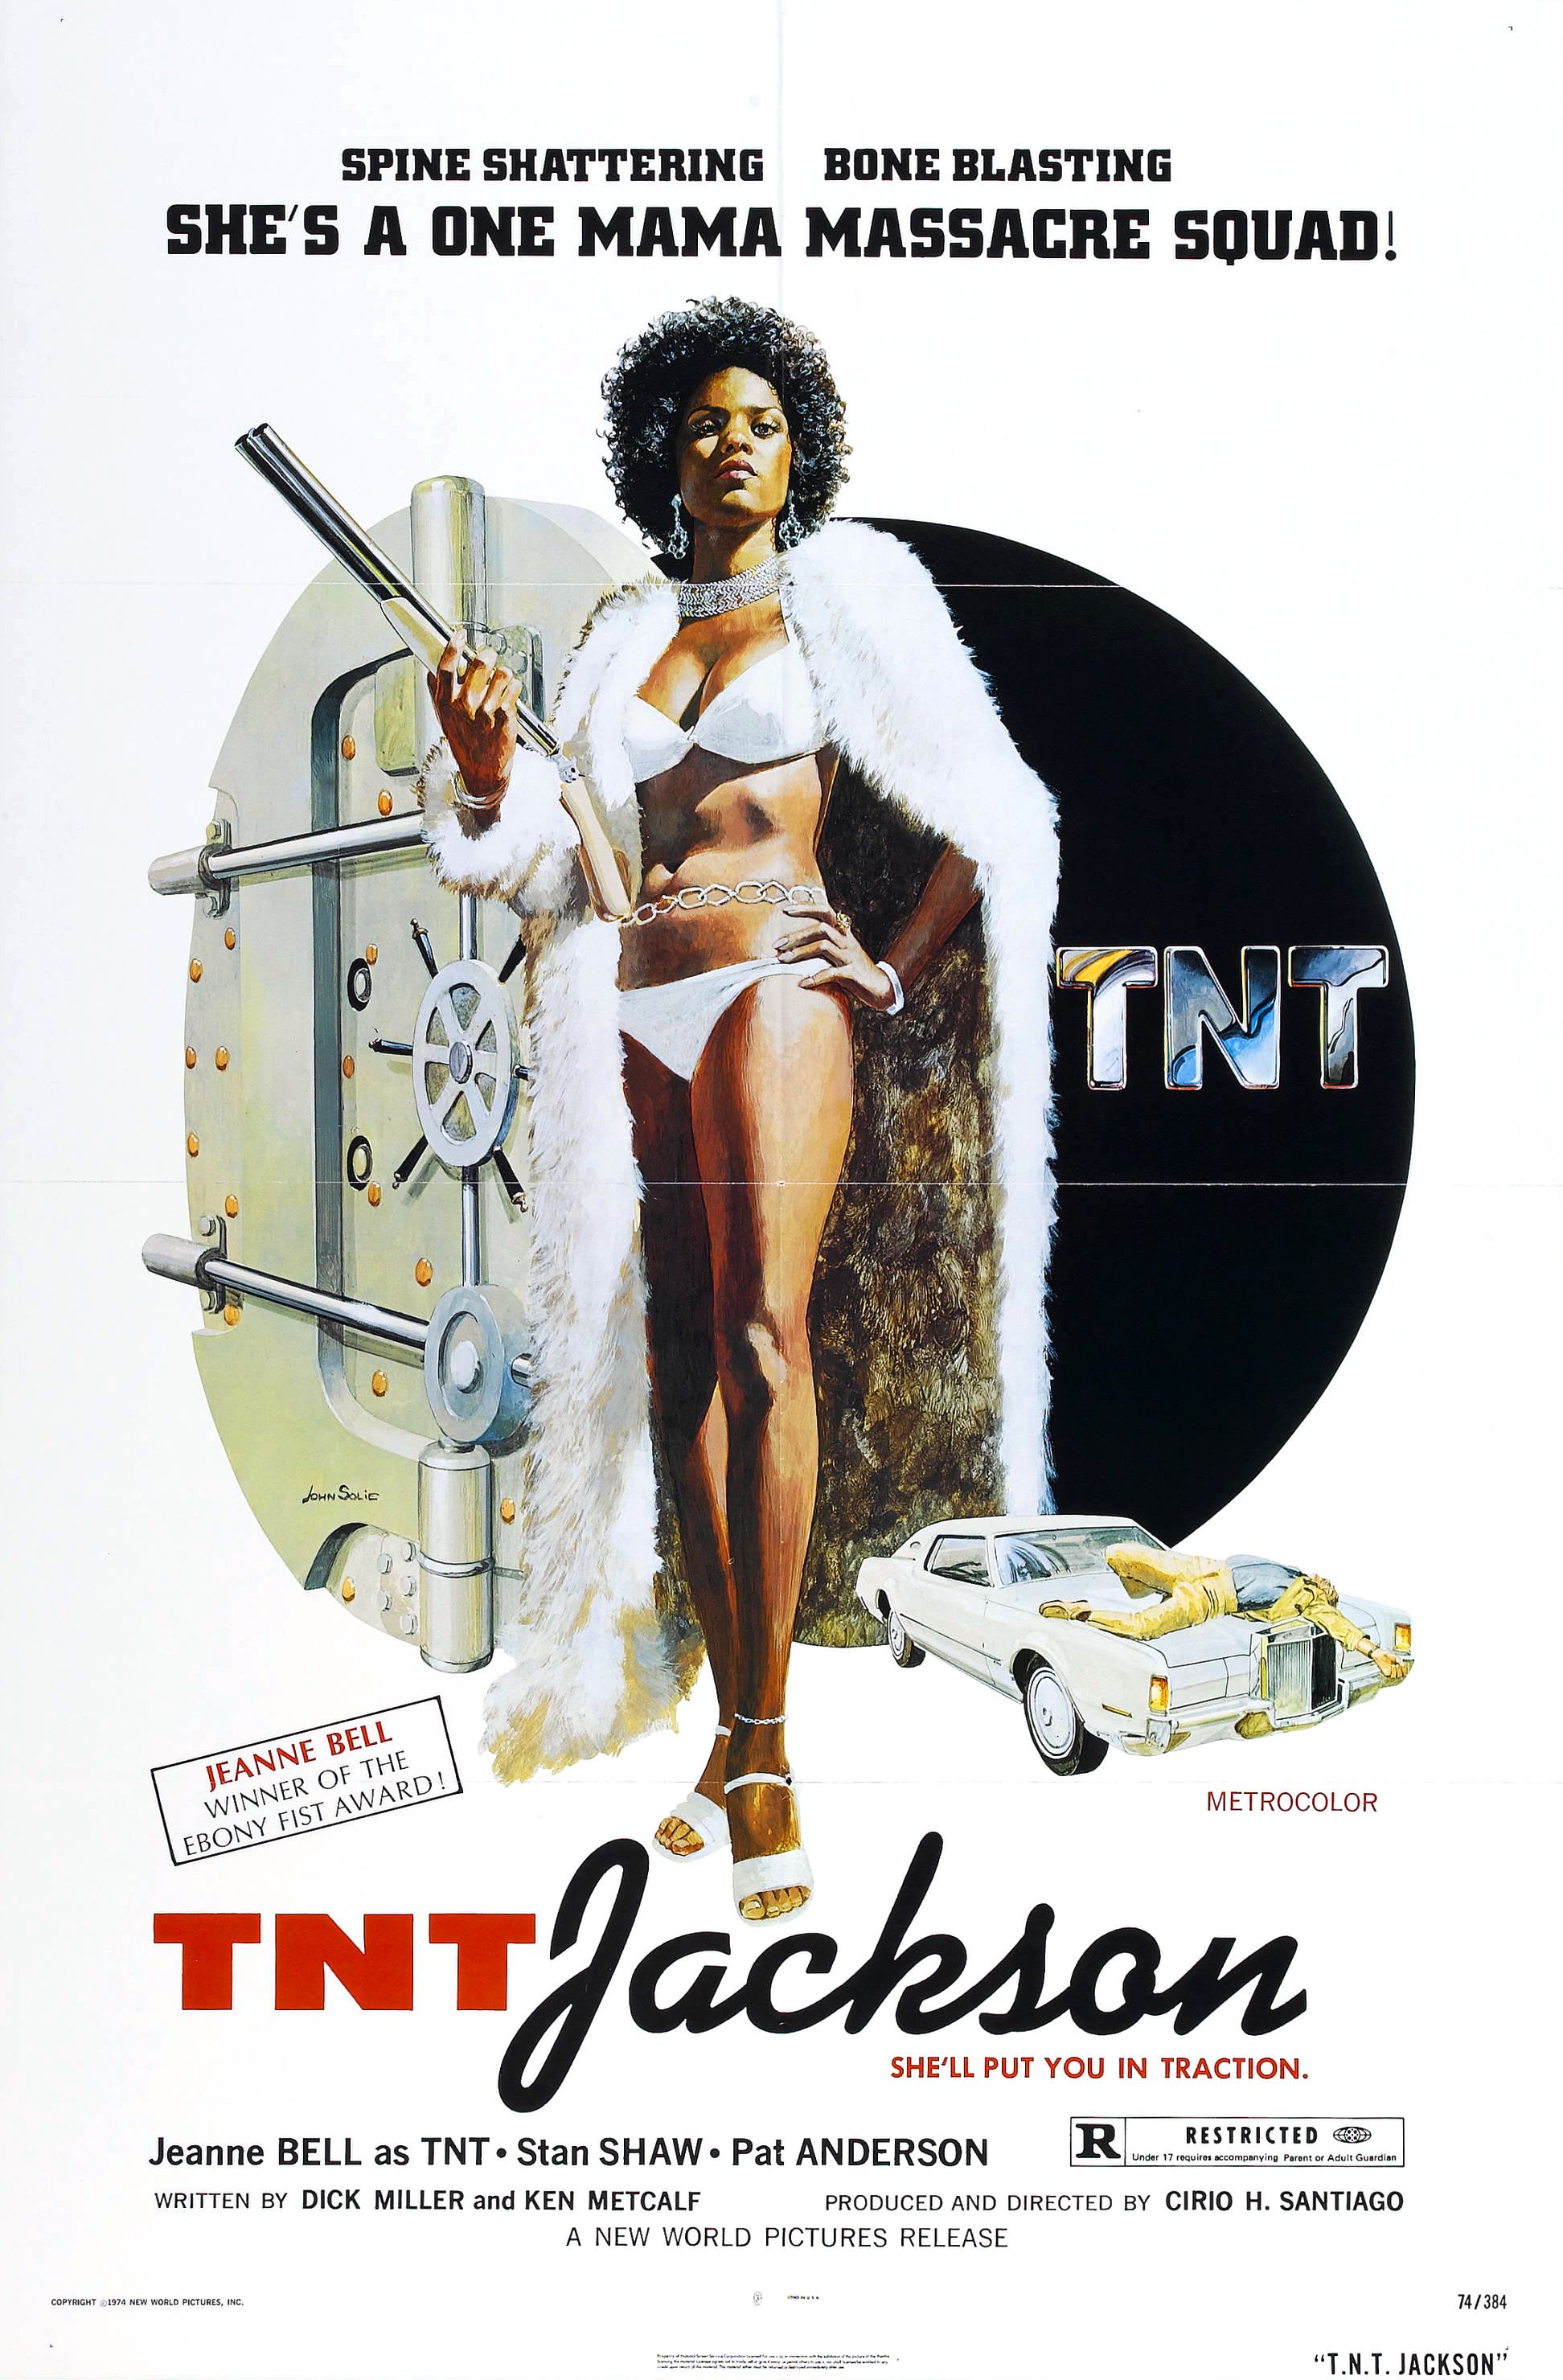 tnt jackson 1974 - Spine Shattering Bone Blasting She'S A One Mama Massacre Squad! Team Of The Hetrocolor TNTJackson Shell Put You In Traction Jeanne Bell Tnt. Stan Shaw. Pat Anderson R I Che Vidy Dick Miller Ken Metcalt Con G Roh. Santiago A New World Pi